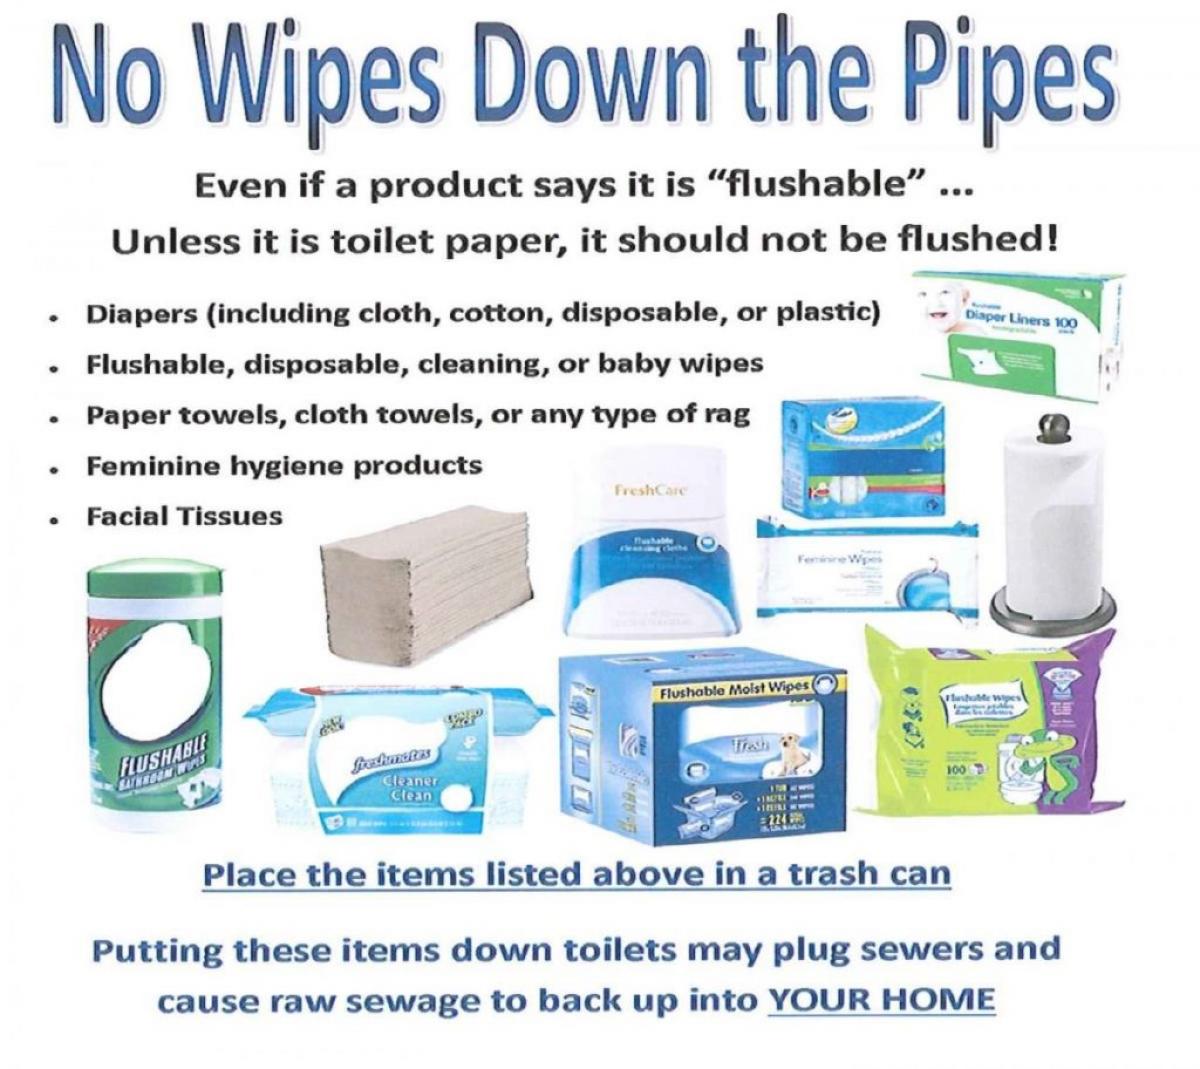 A "No Wipes Down the Pipes" flyer